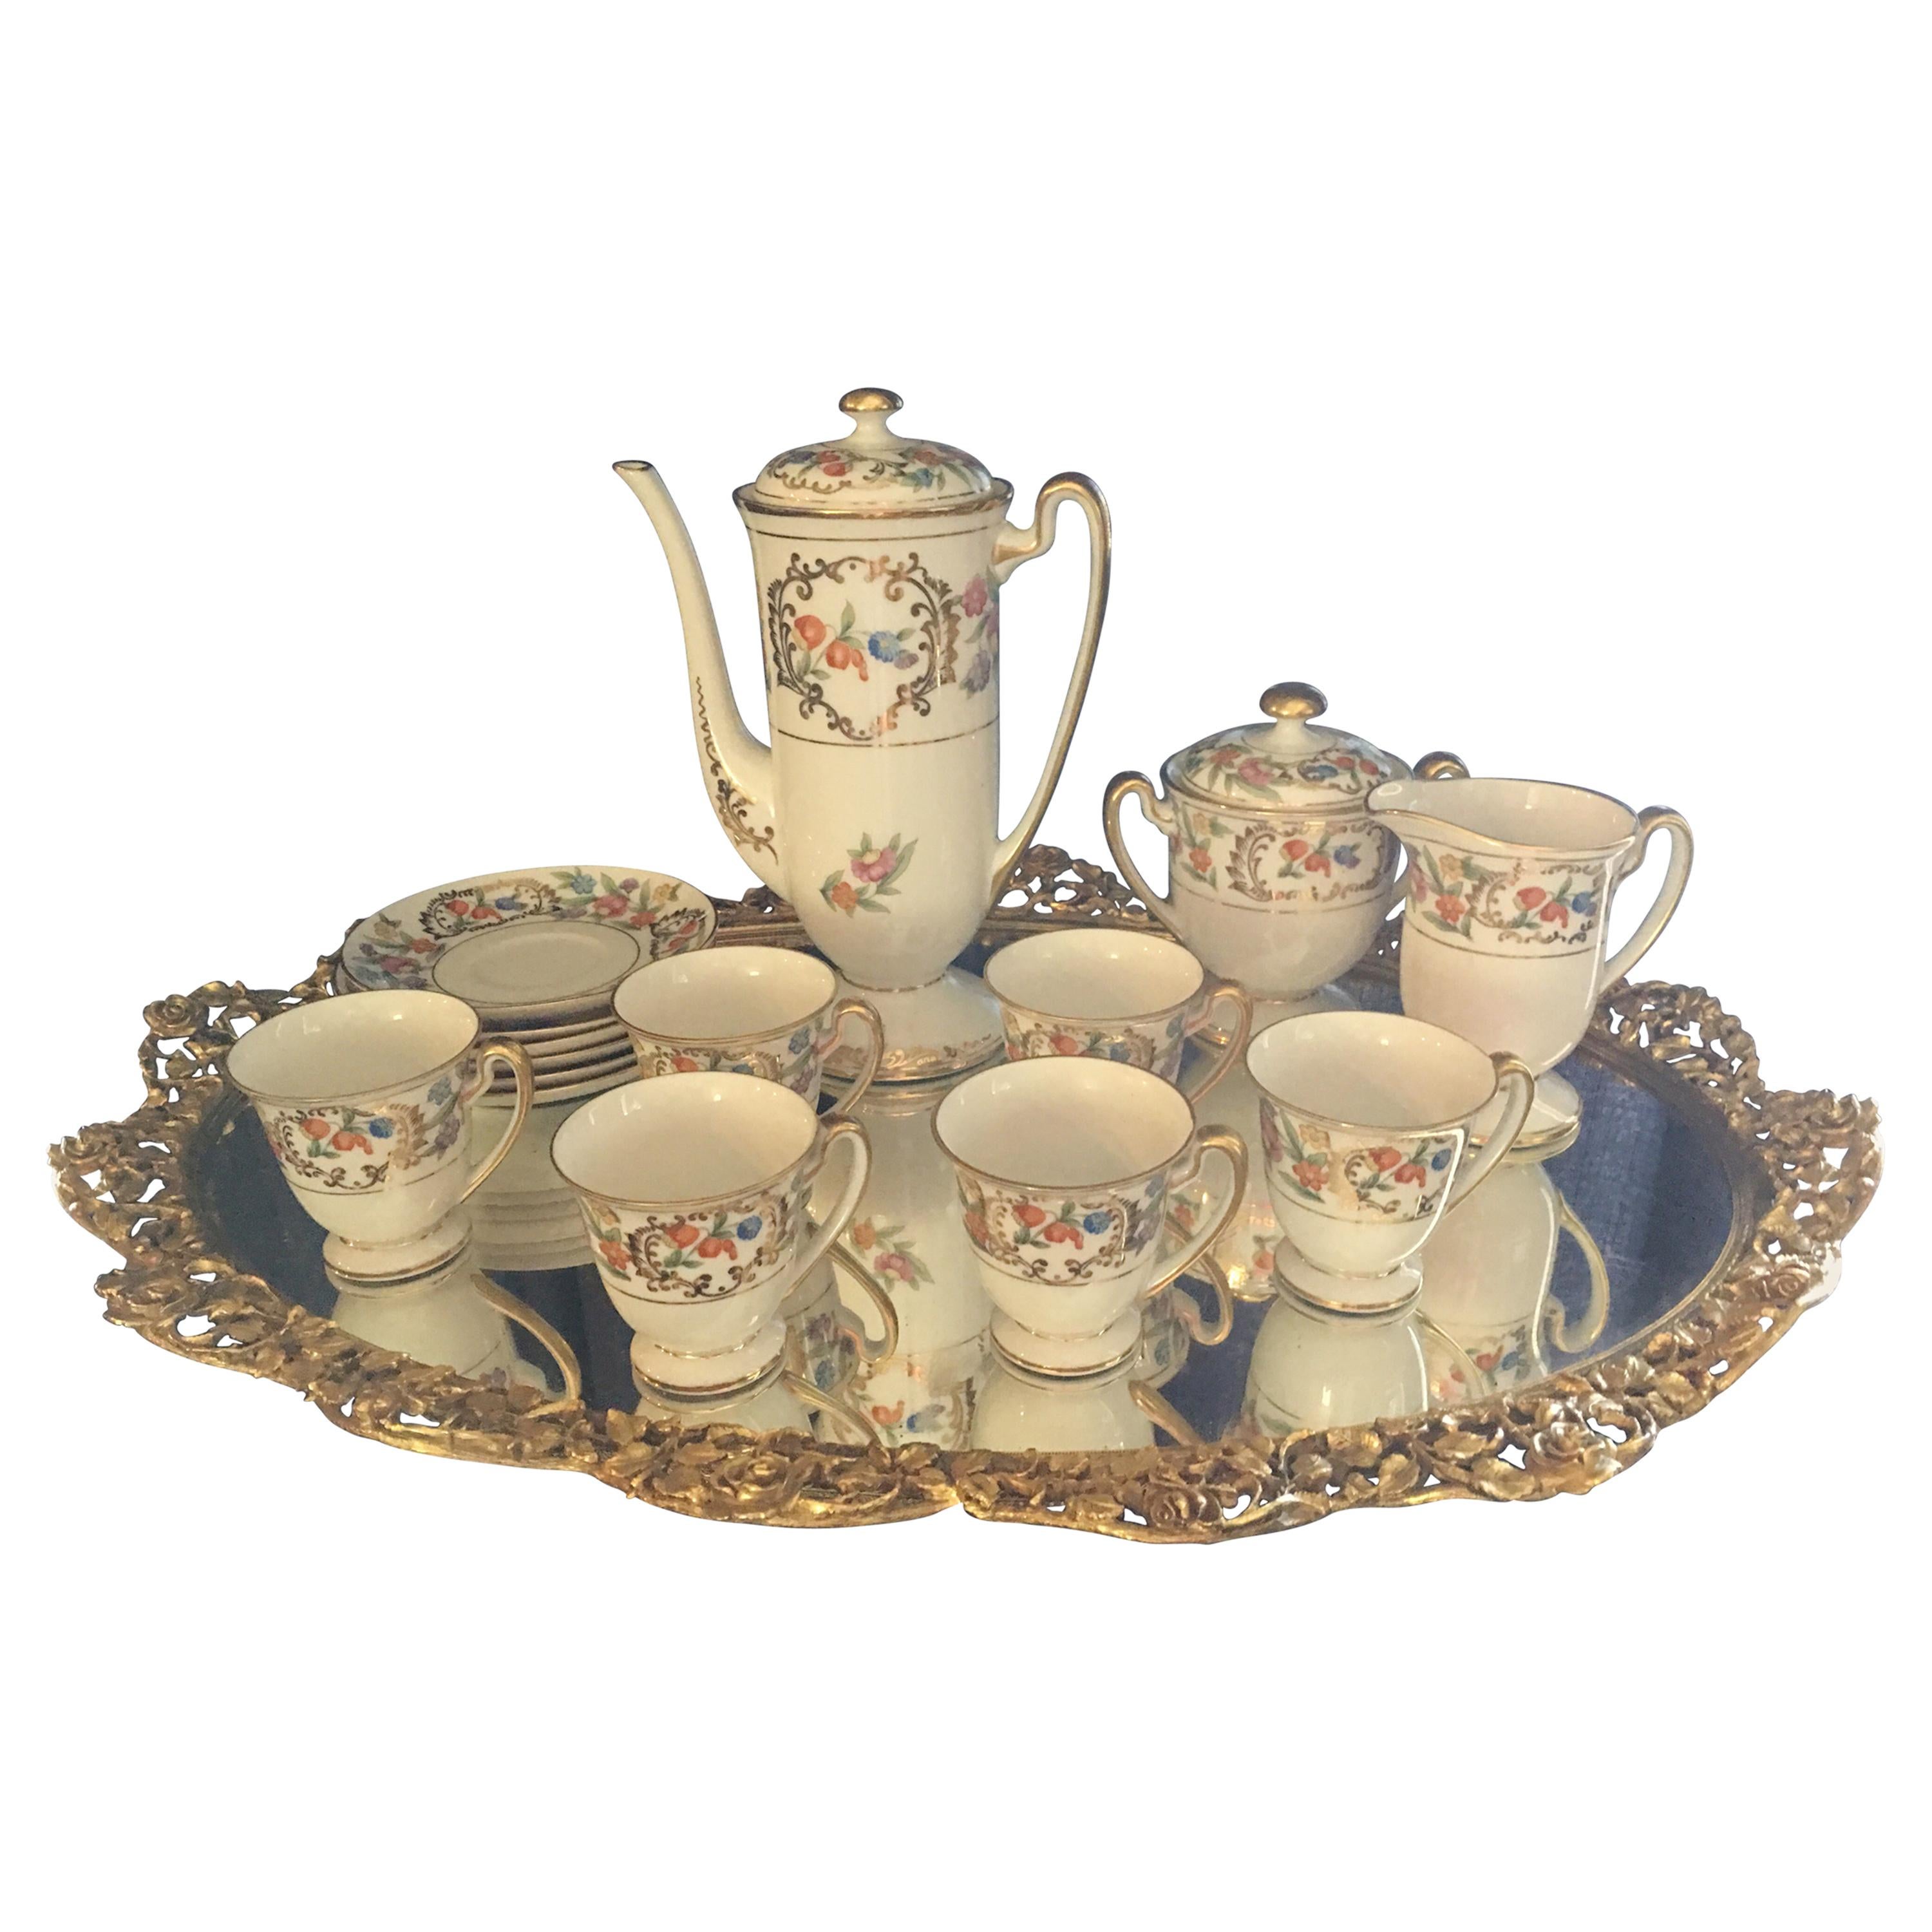 Lovely Floral Fine China Tea Set for Six with Floral Brass Tray by Melton